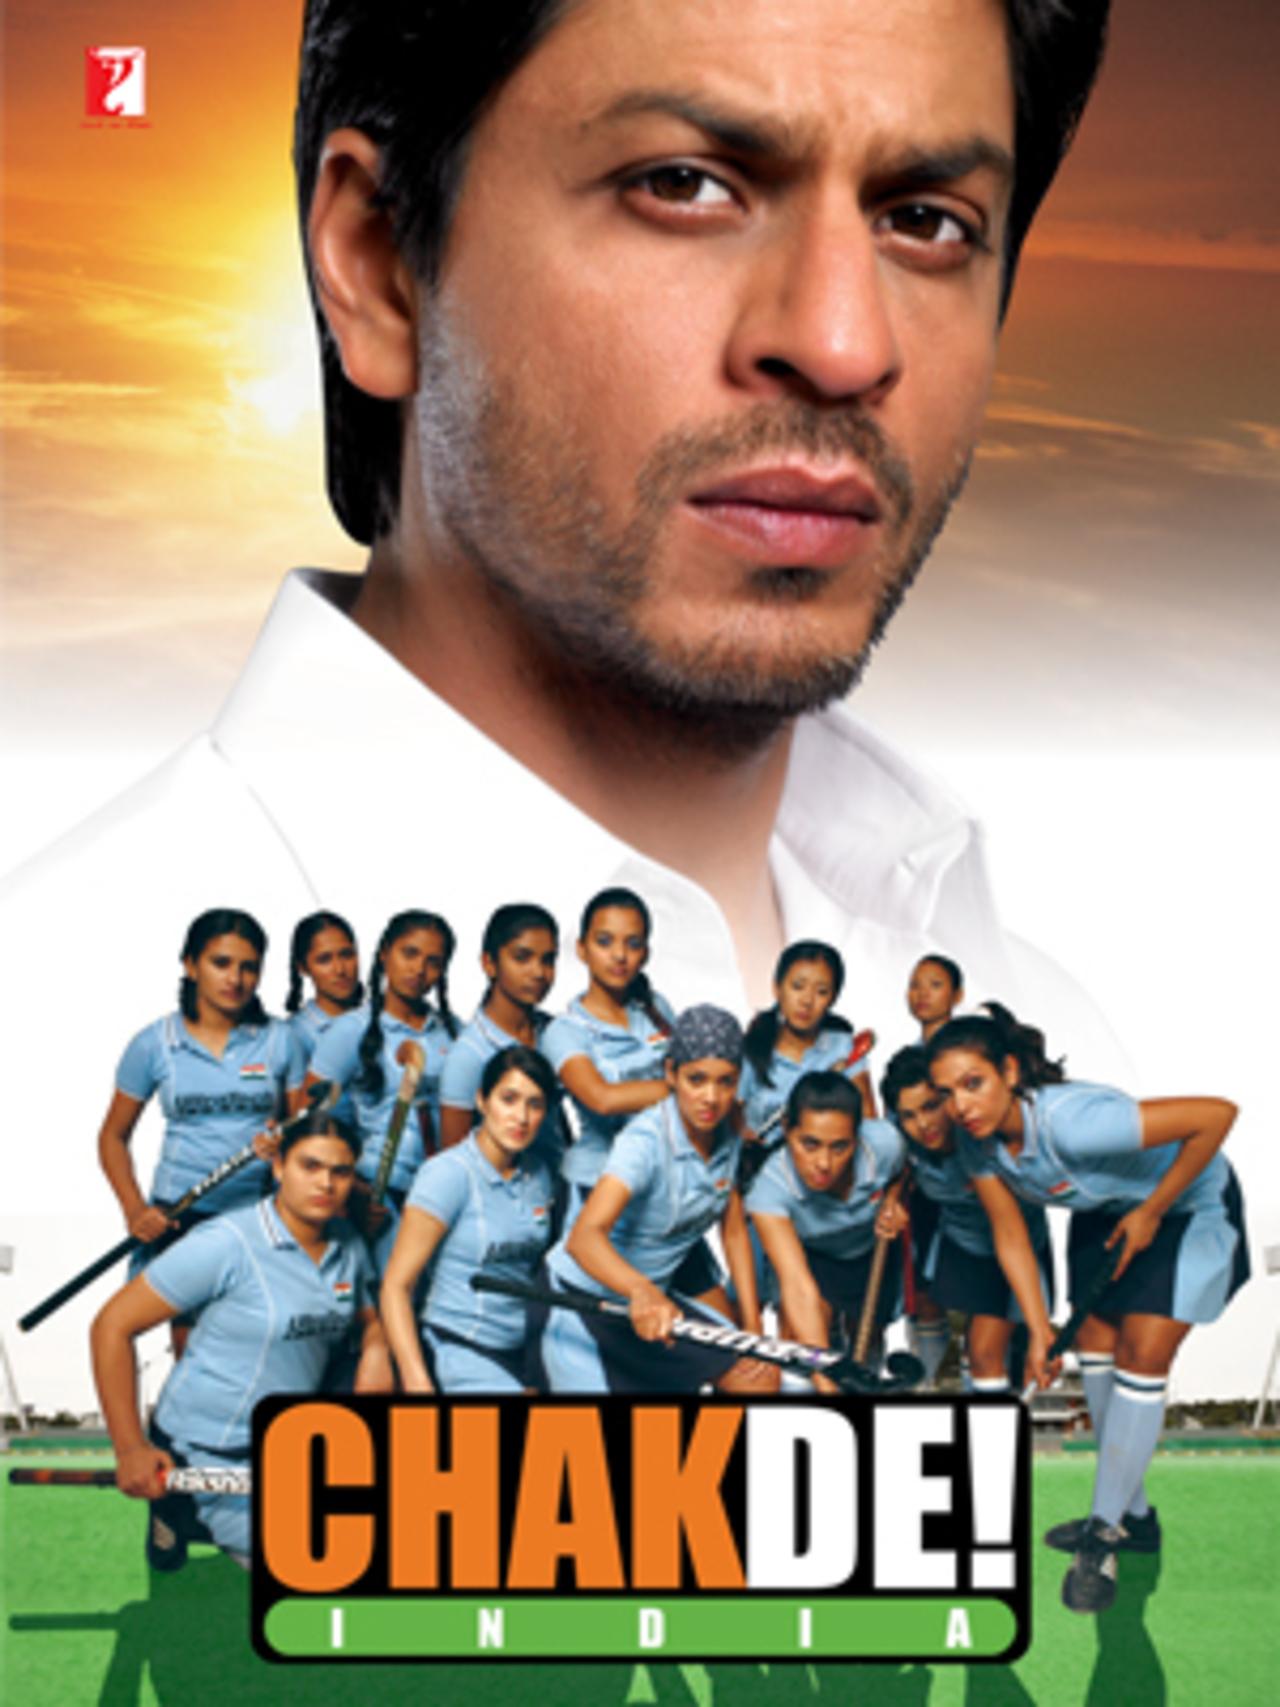 Shah Rukh Khan's CHAKDE! India The film focuses on Kabir Khan's efforts to coach the Indian women's hockey team, which has been plagued by internal conflicts, regional biases, and a lack of support. He transforms the underdog team into a united and competitive force that ultimately challenges stereotypes and overcomes obstacles to compete at an international level